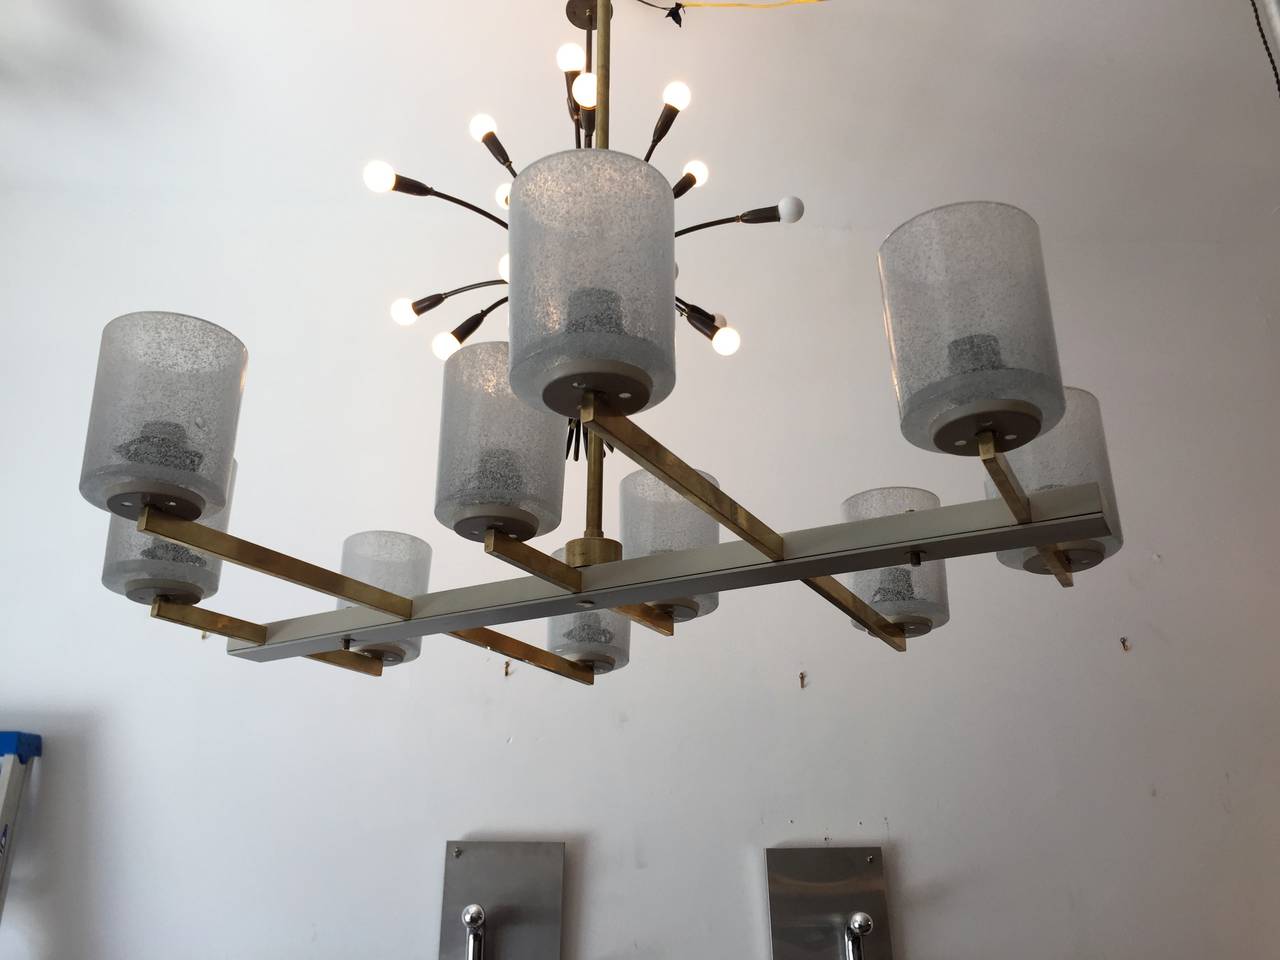 A sleek 1950s Italian Mid-Century ten-light polished brass and light cream enamel fixture with thick bubbled glass shades. Rewired and restored.